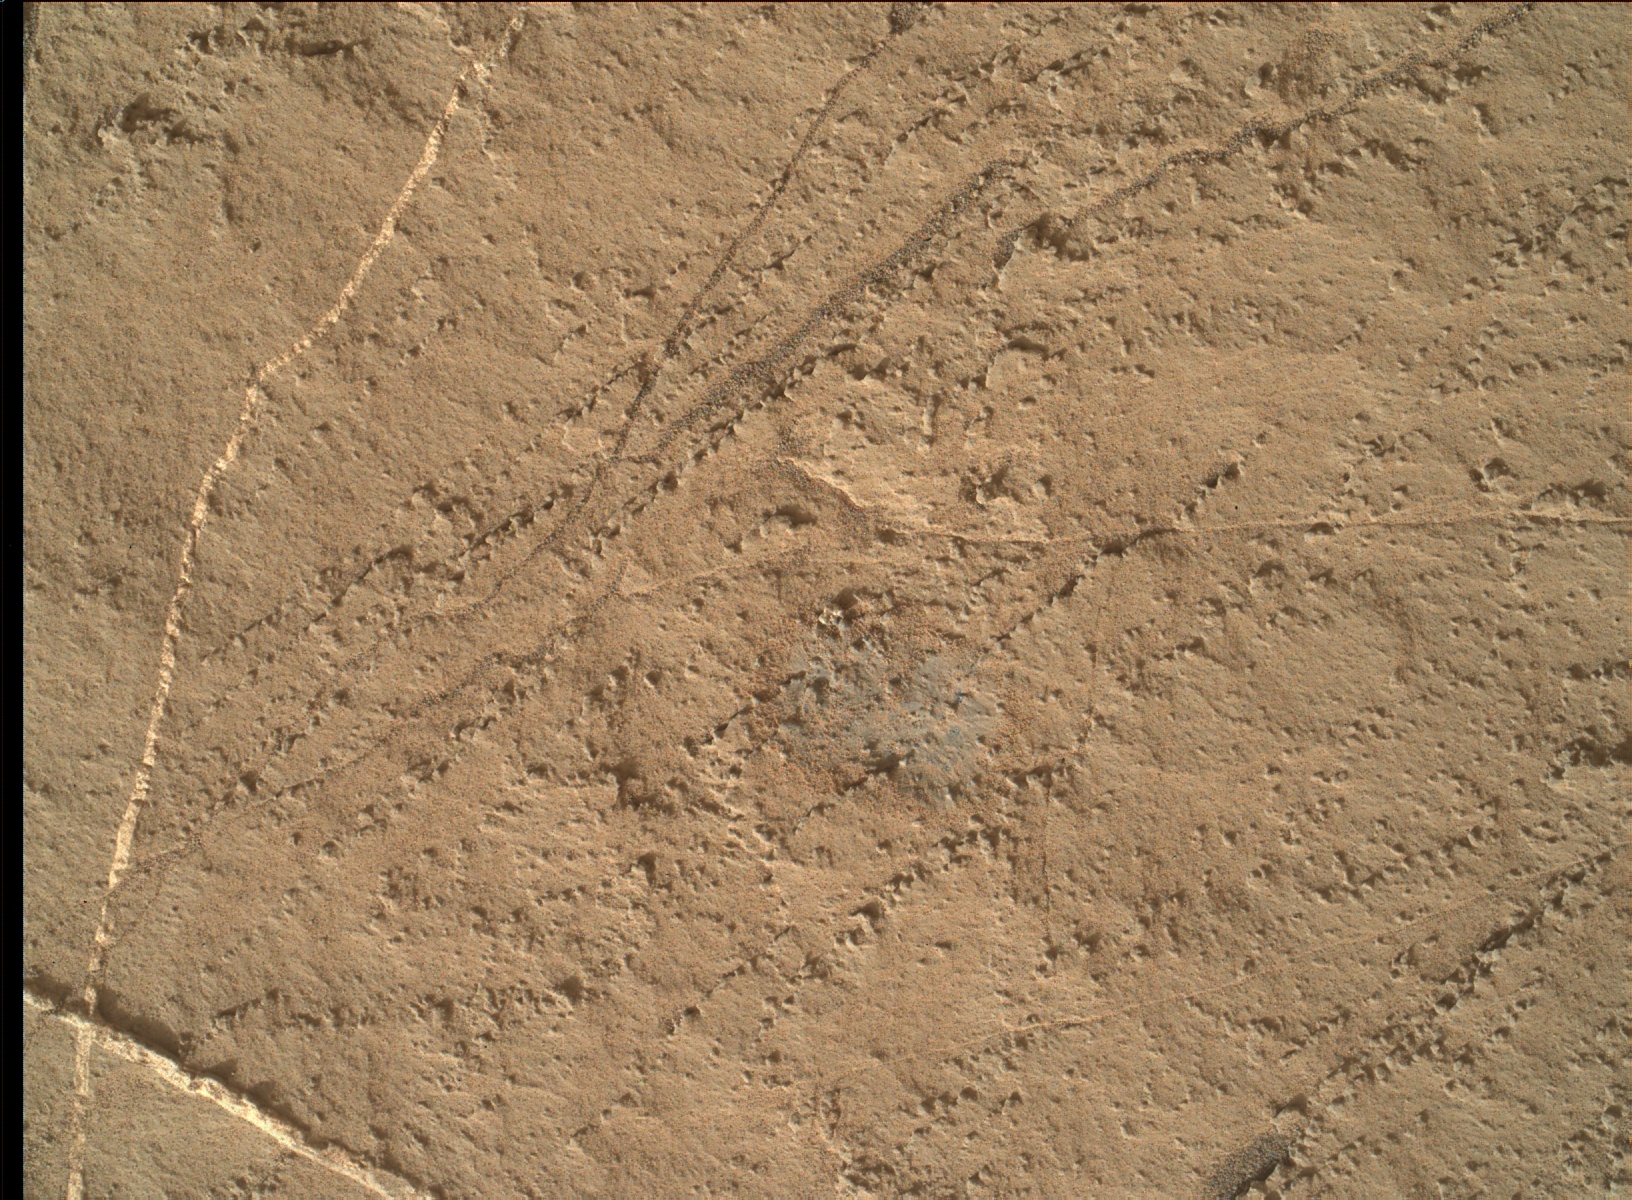 Nasa's Mars rover Curiosity acquired this image using its Mars Hand Lens Imager (MAHLI) on Sol 1105